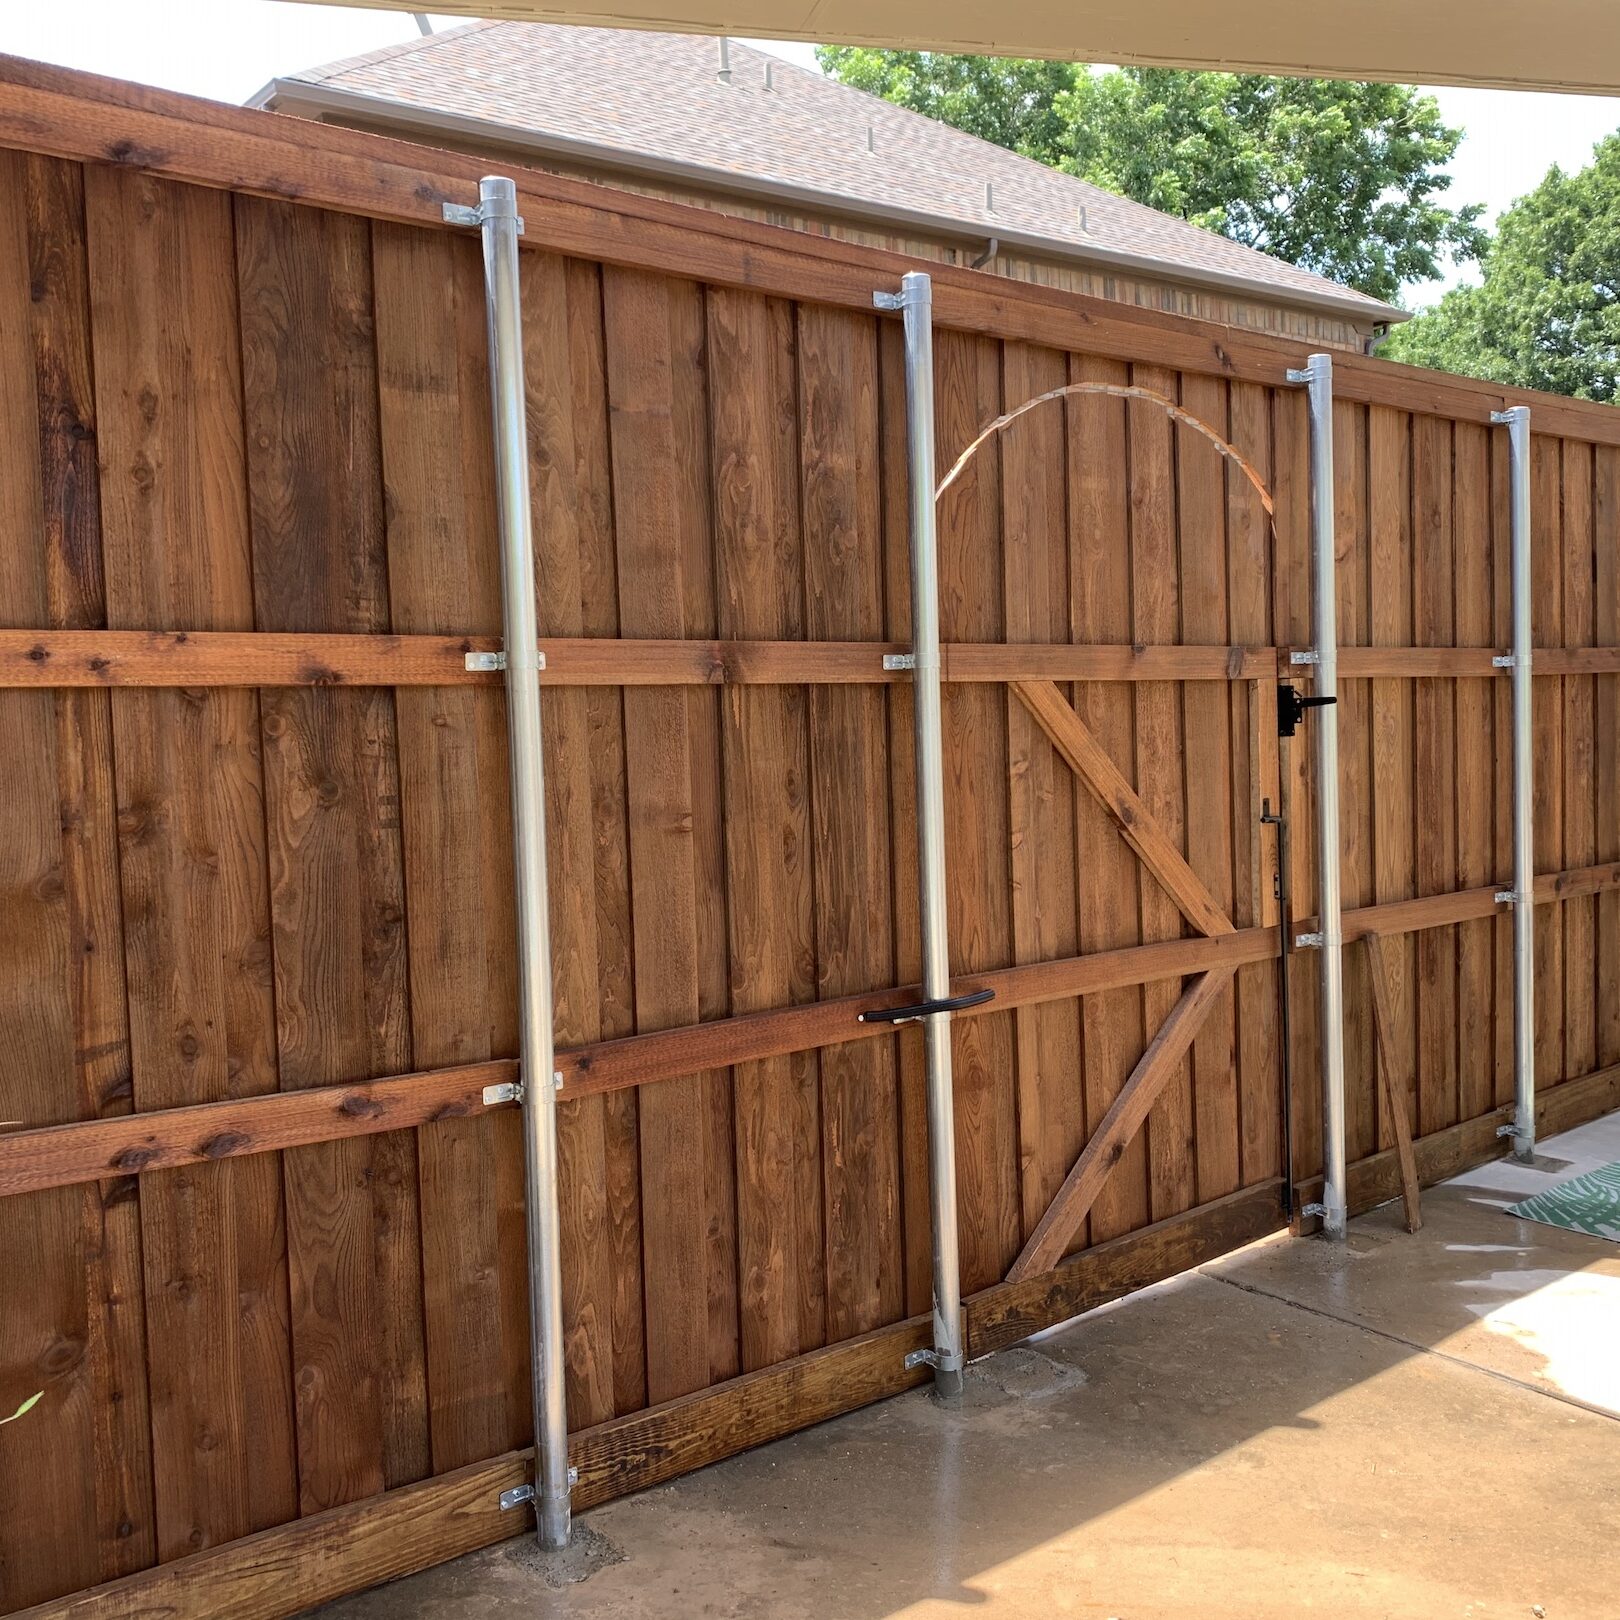 Fort Worth Fence Companies | Fence Replacement | Board on Board Fence Fort Worth